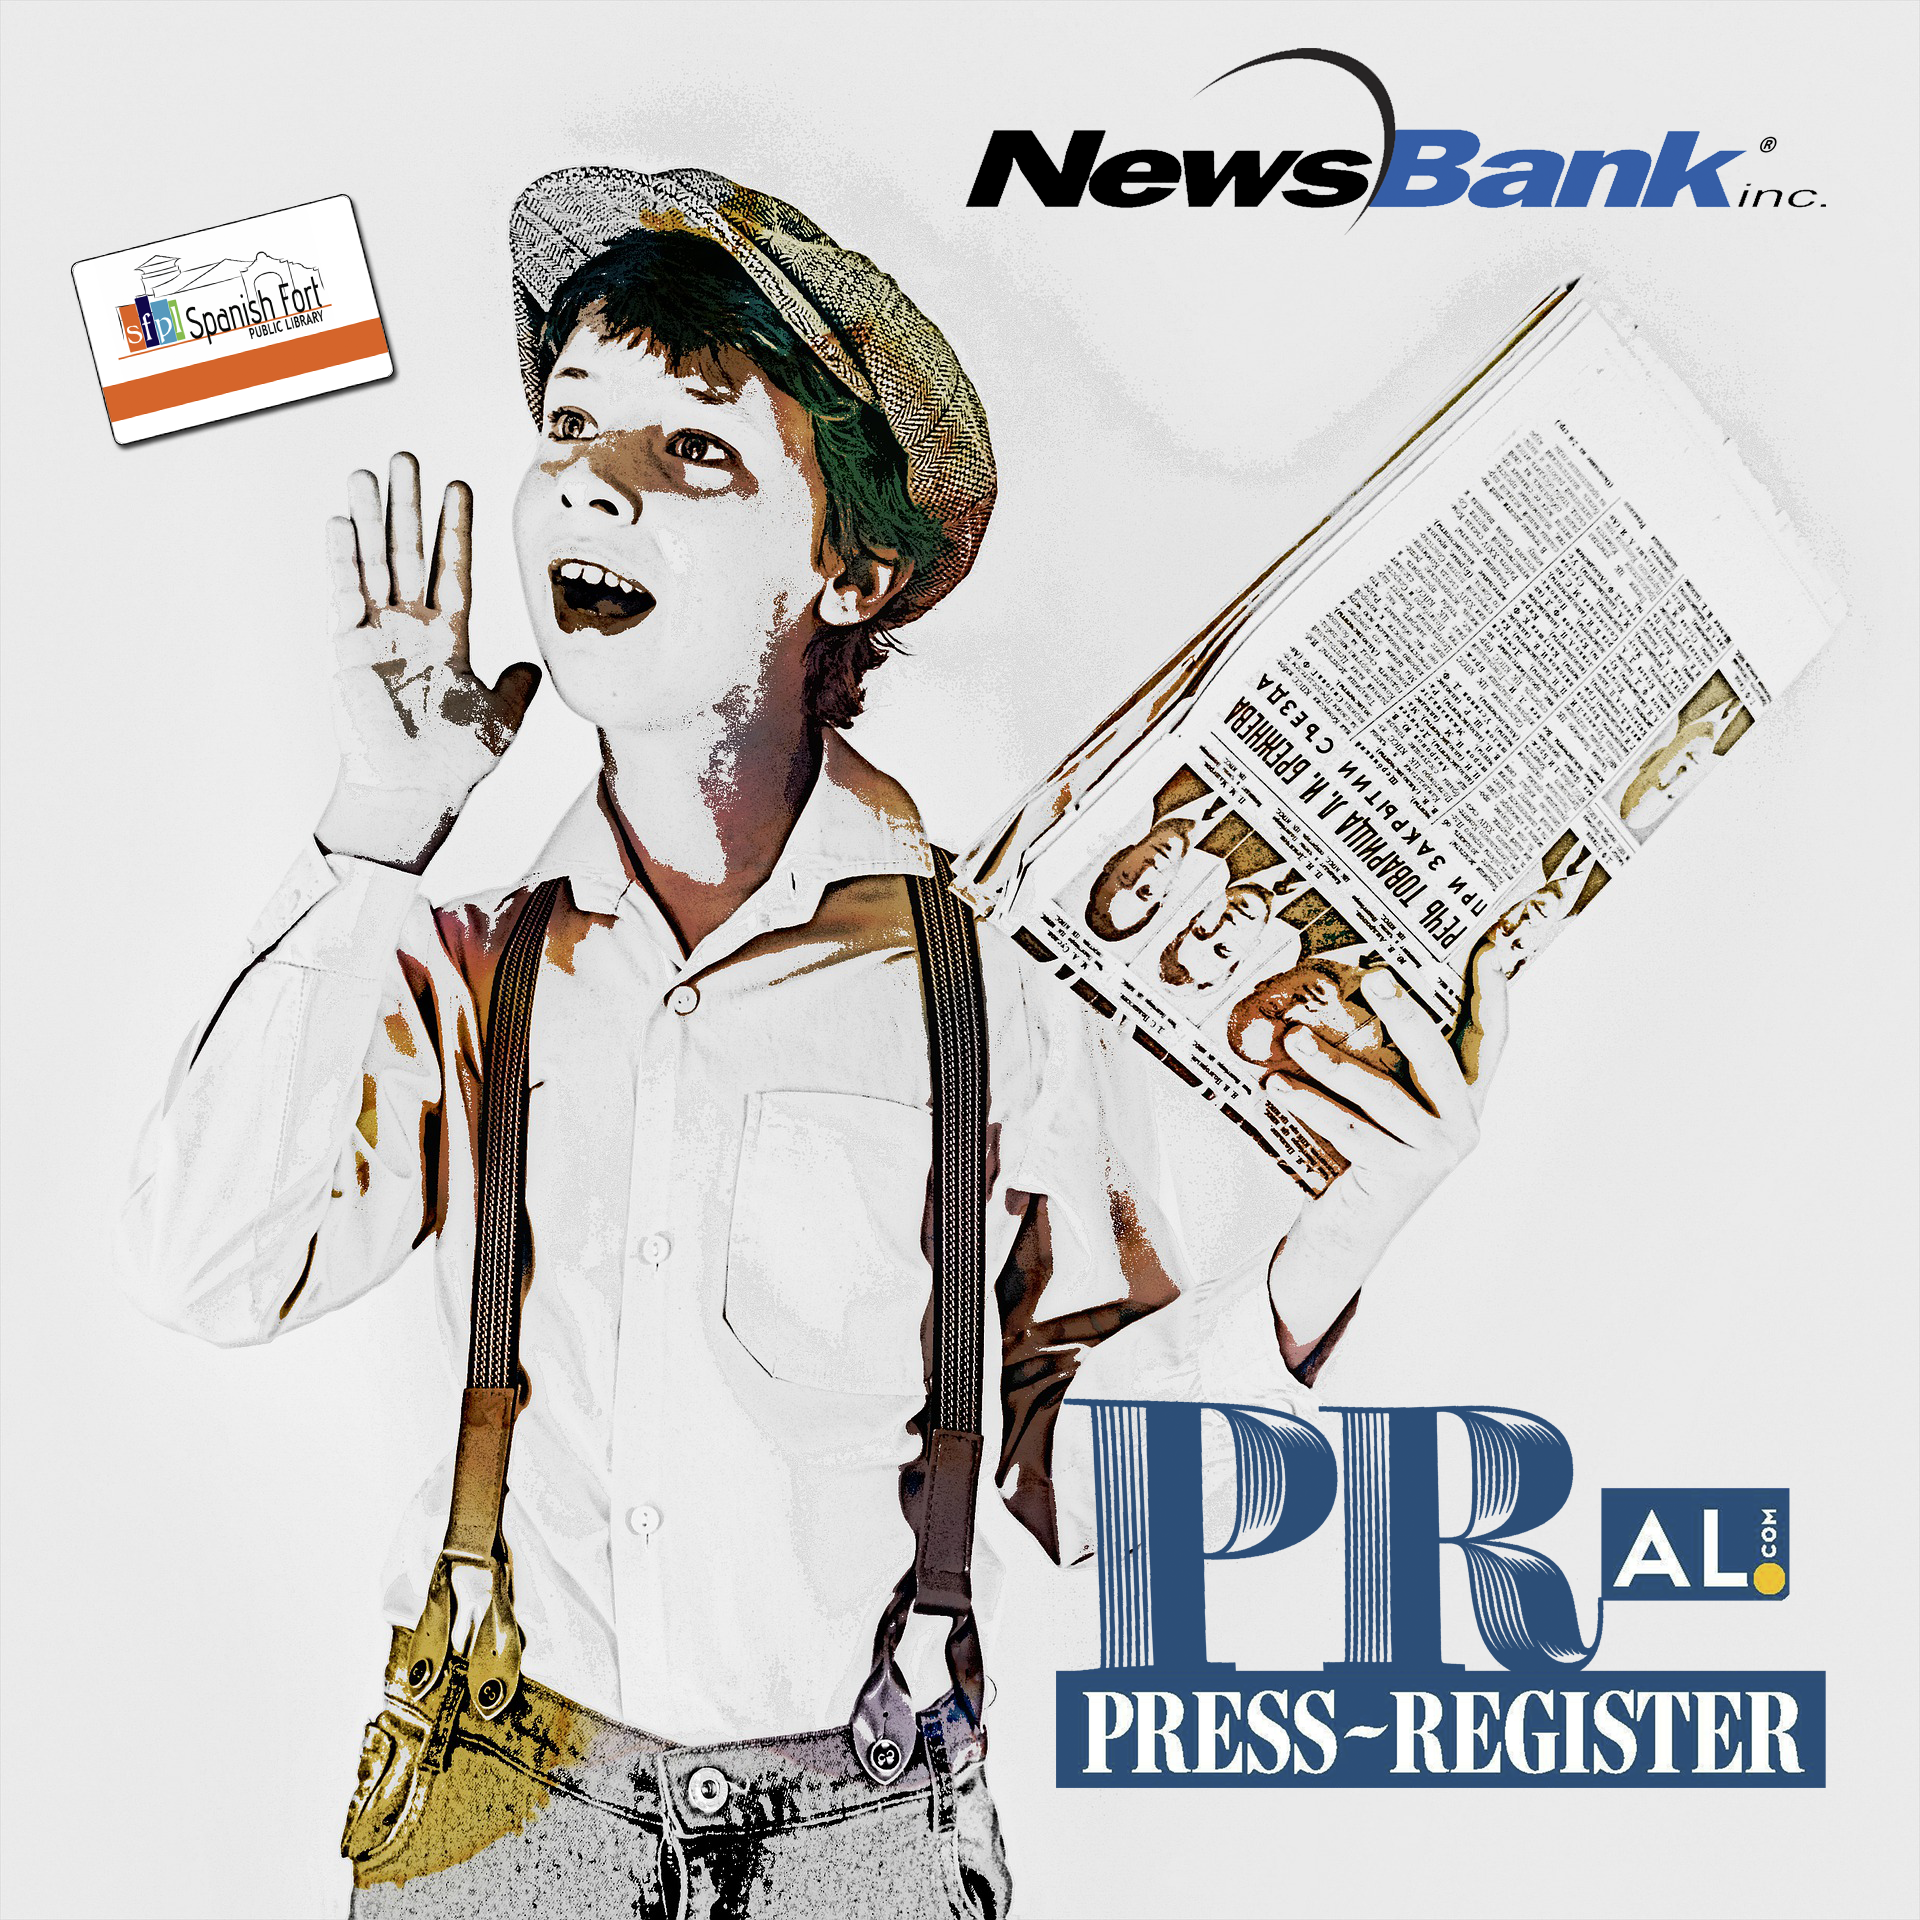 Mobile Press Register available with your library card through NewsBank